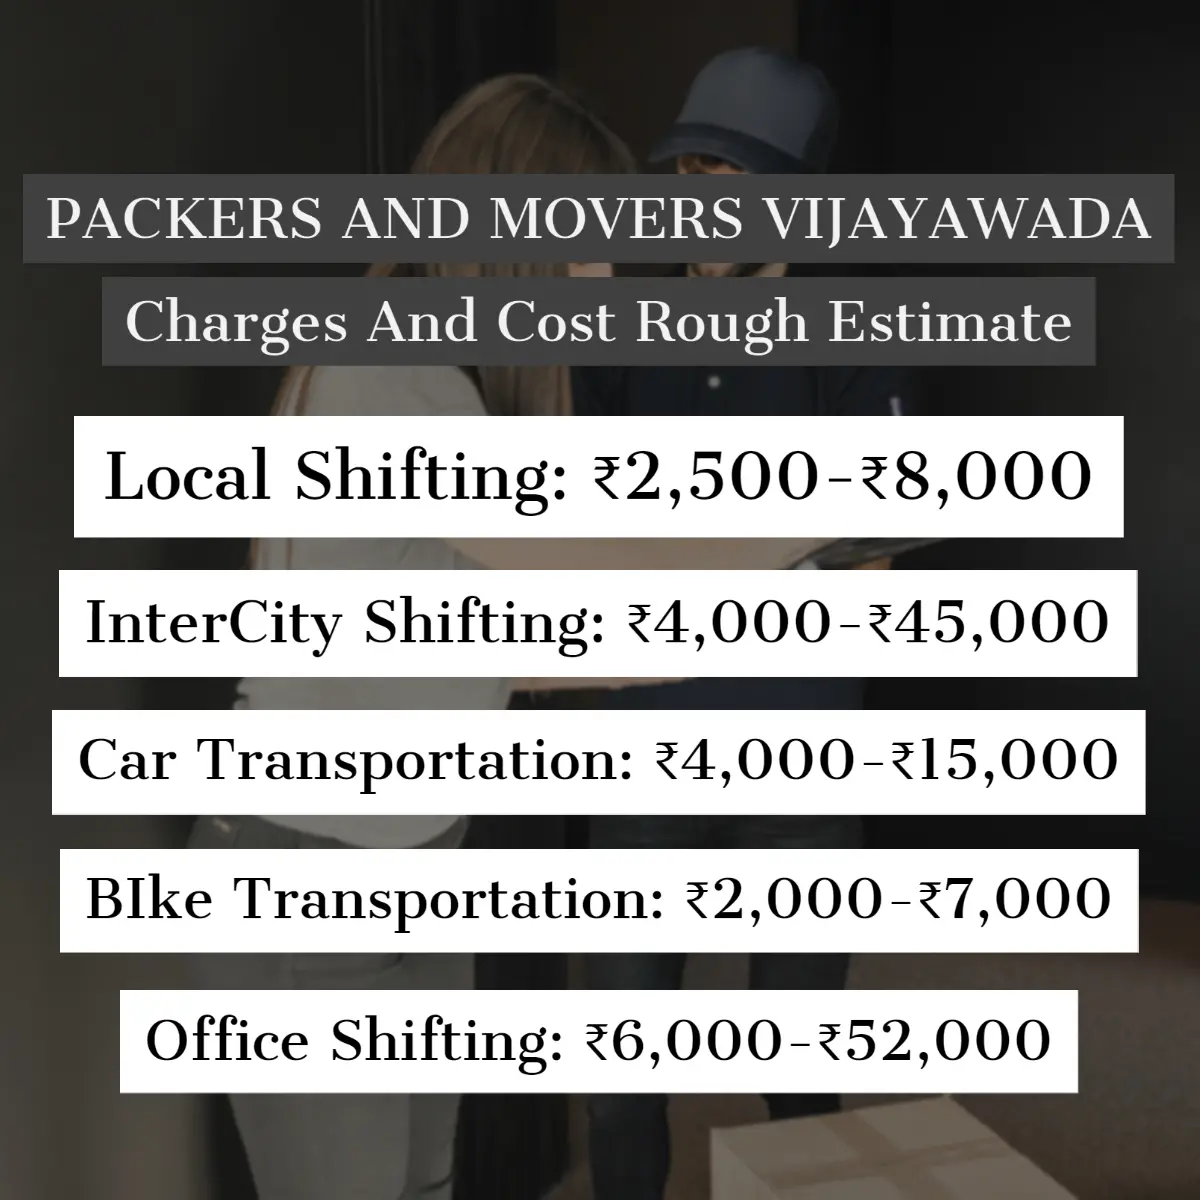 Packers and Movers Vijayawada Charges